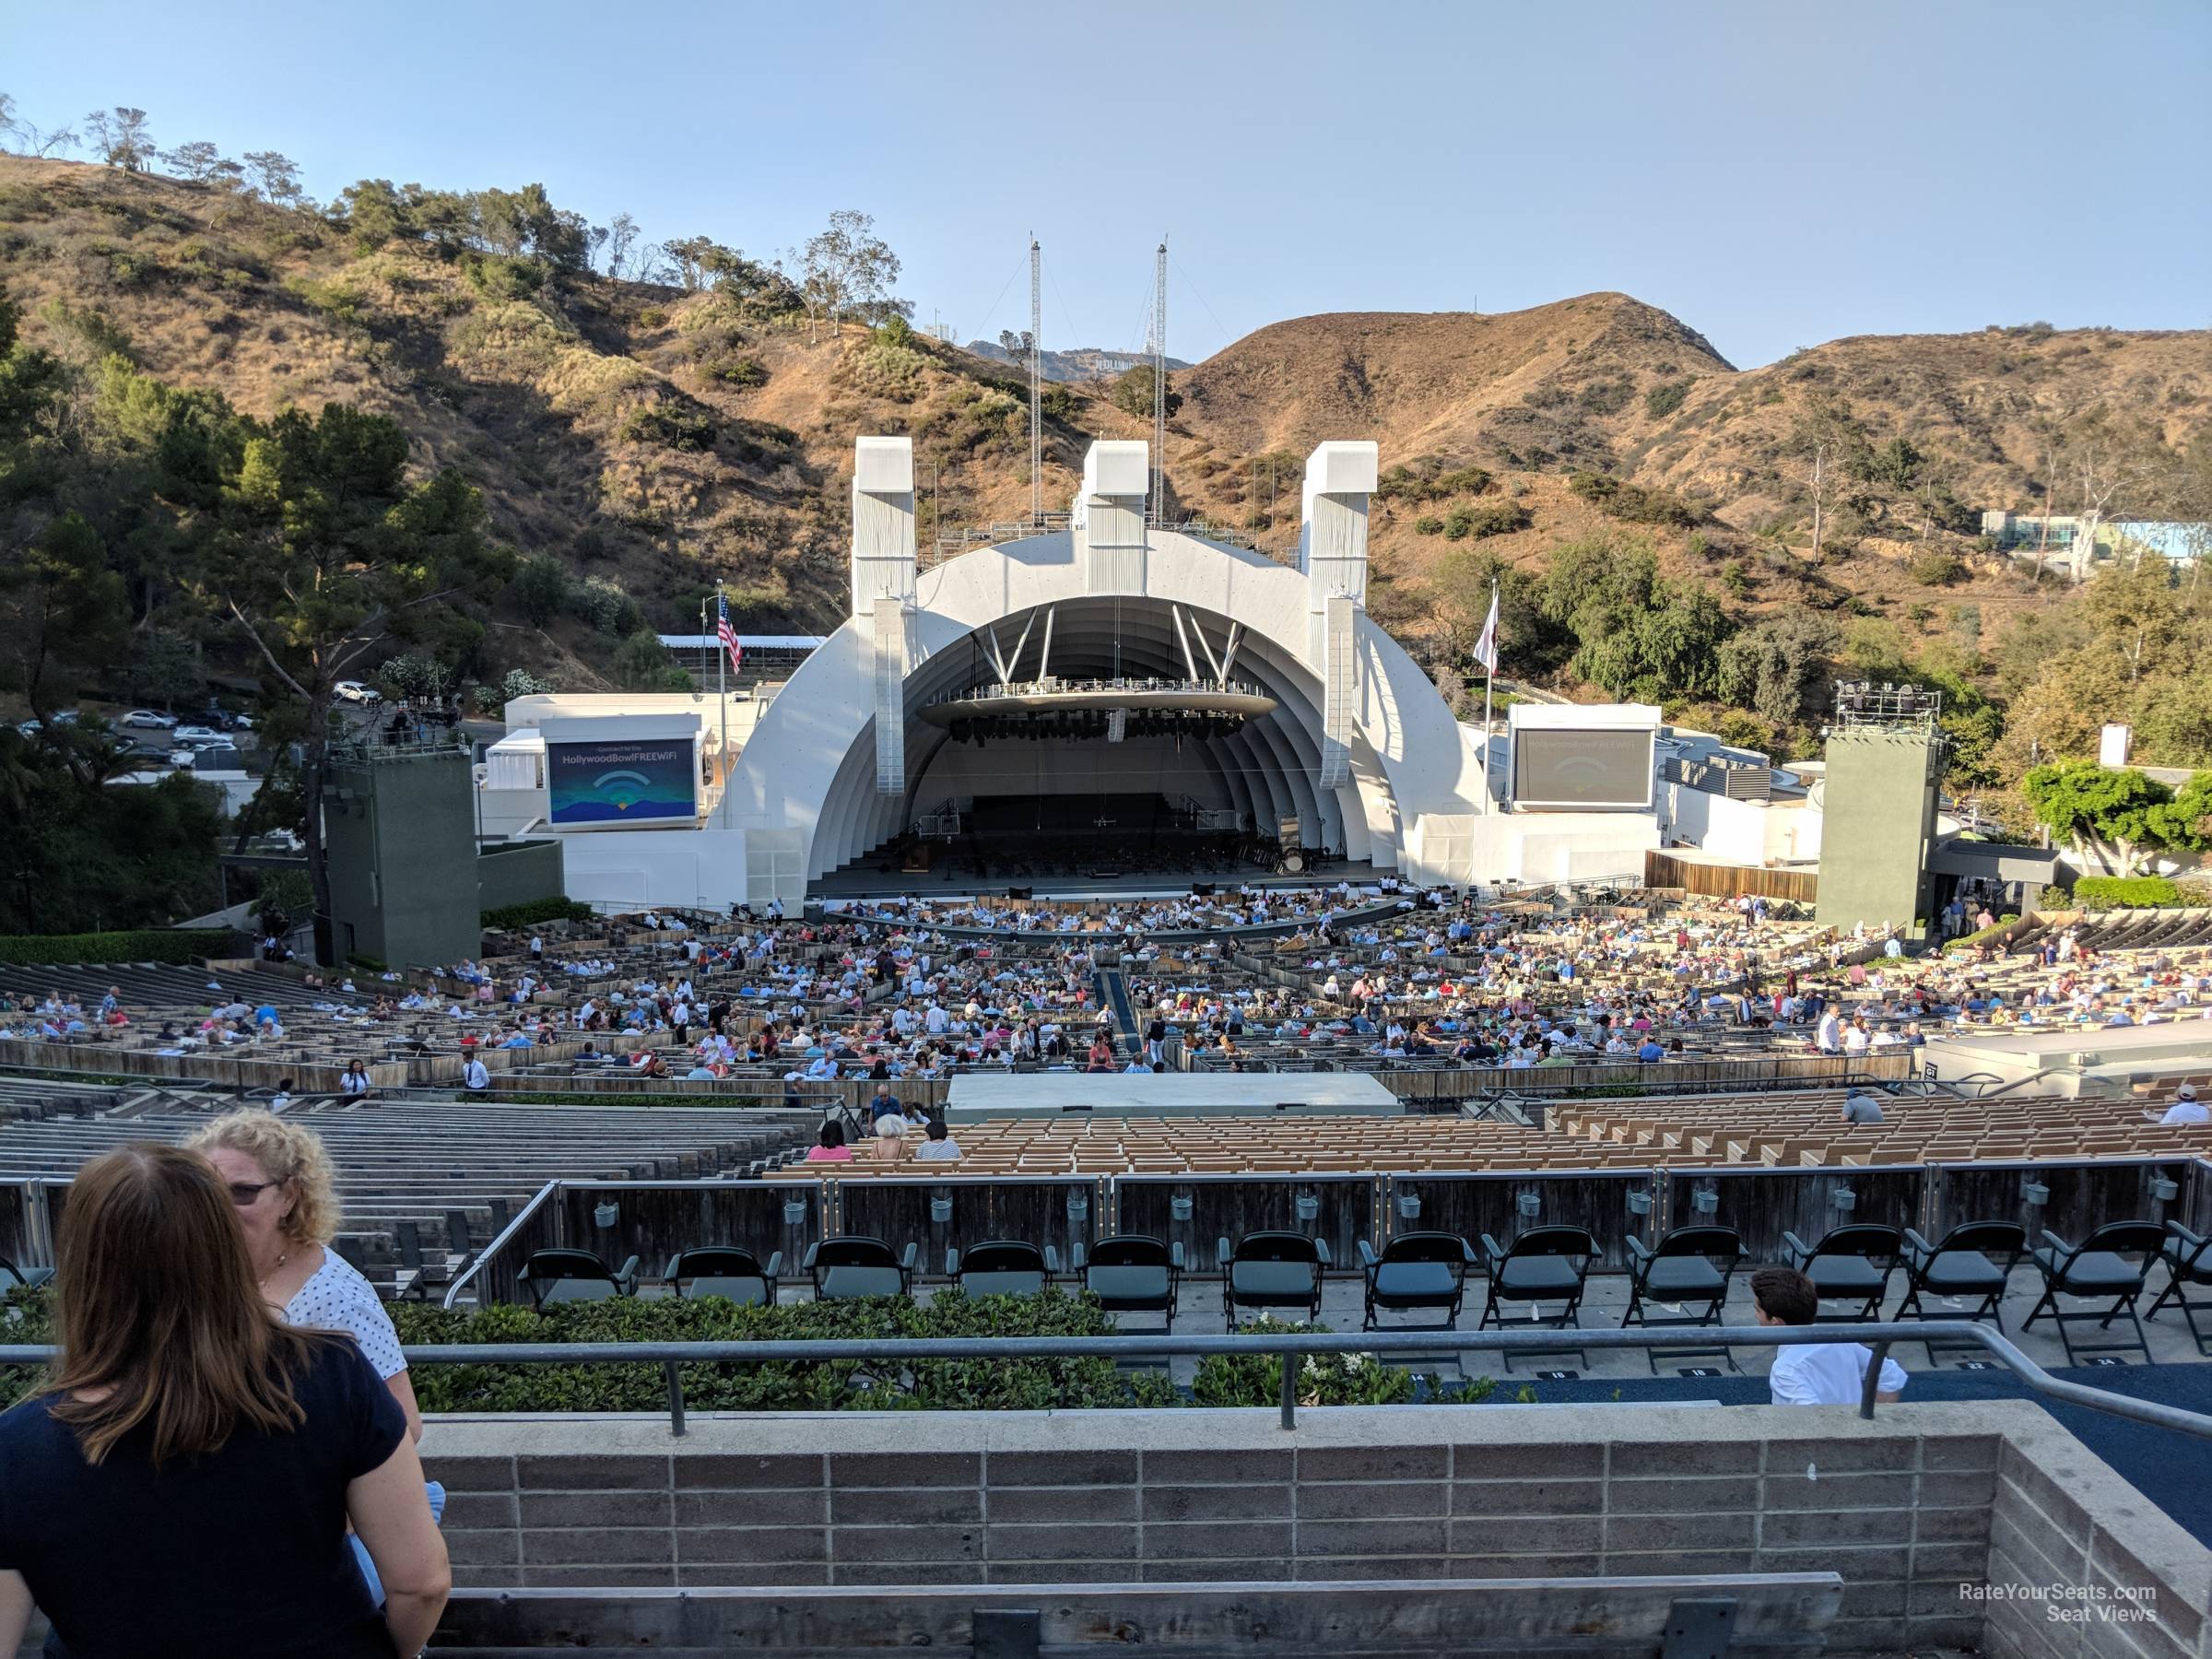 Hollywood Bowl Section N2 - RateYourSeats.com2400 x 1800